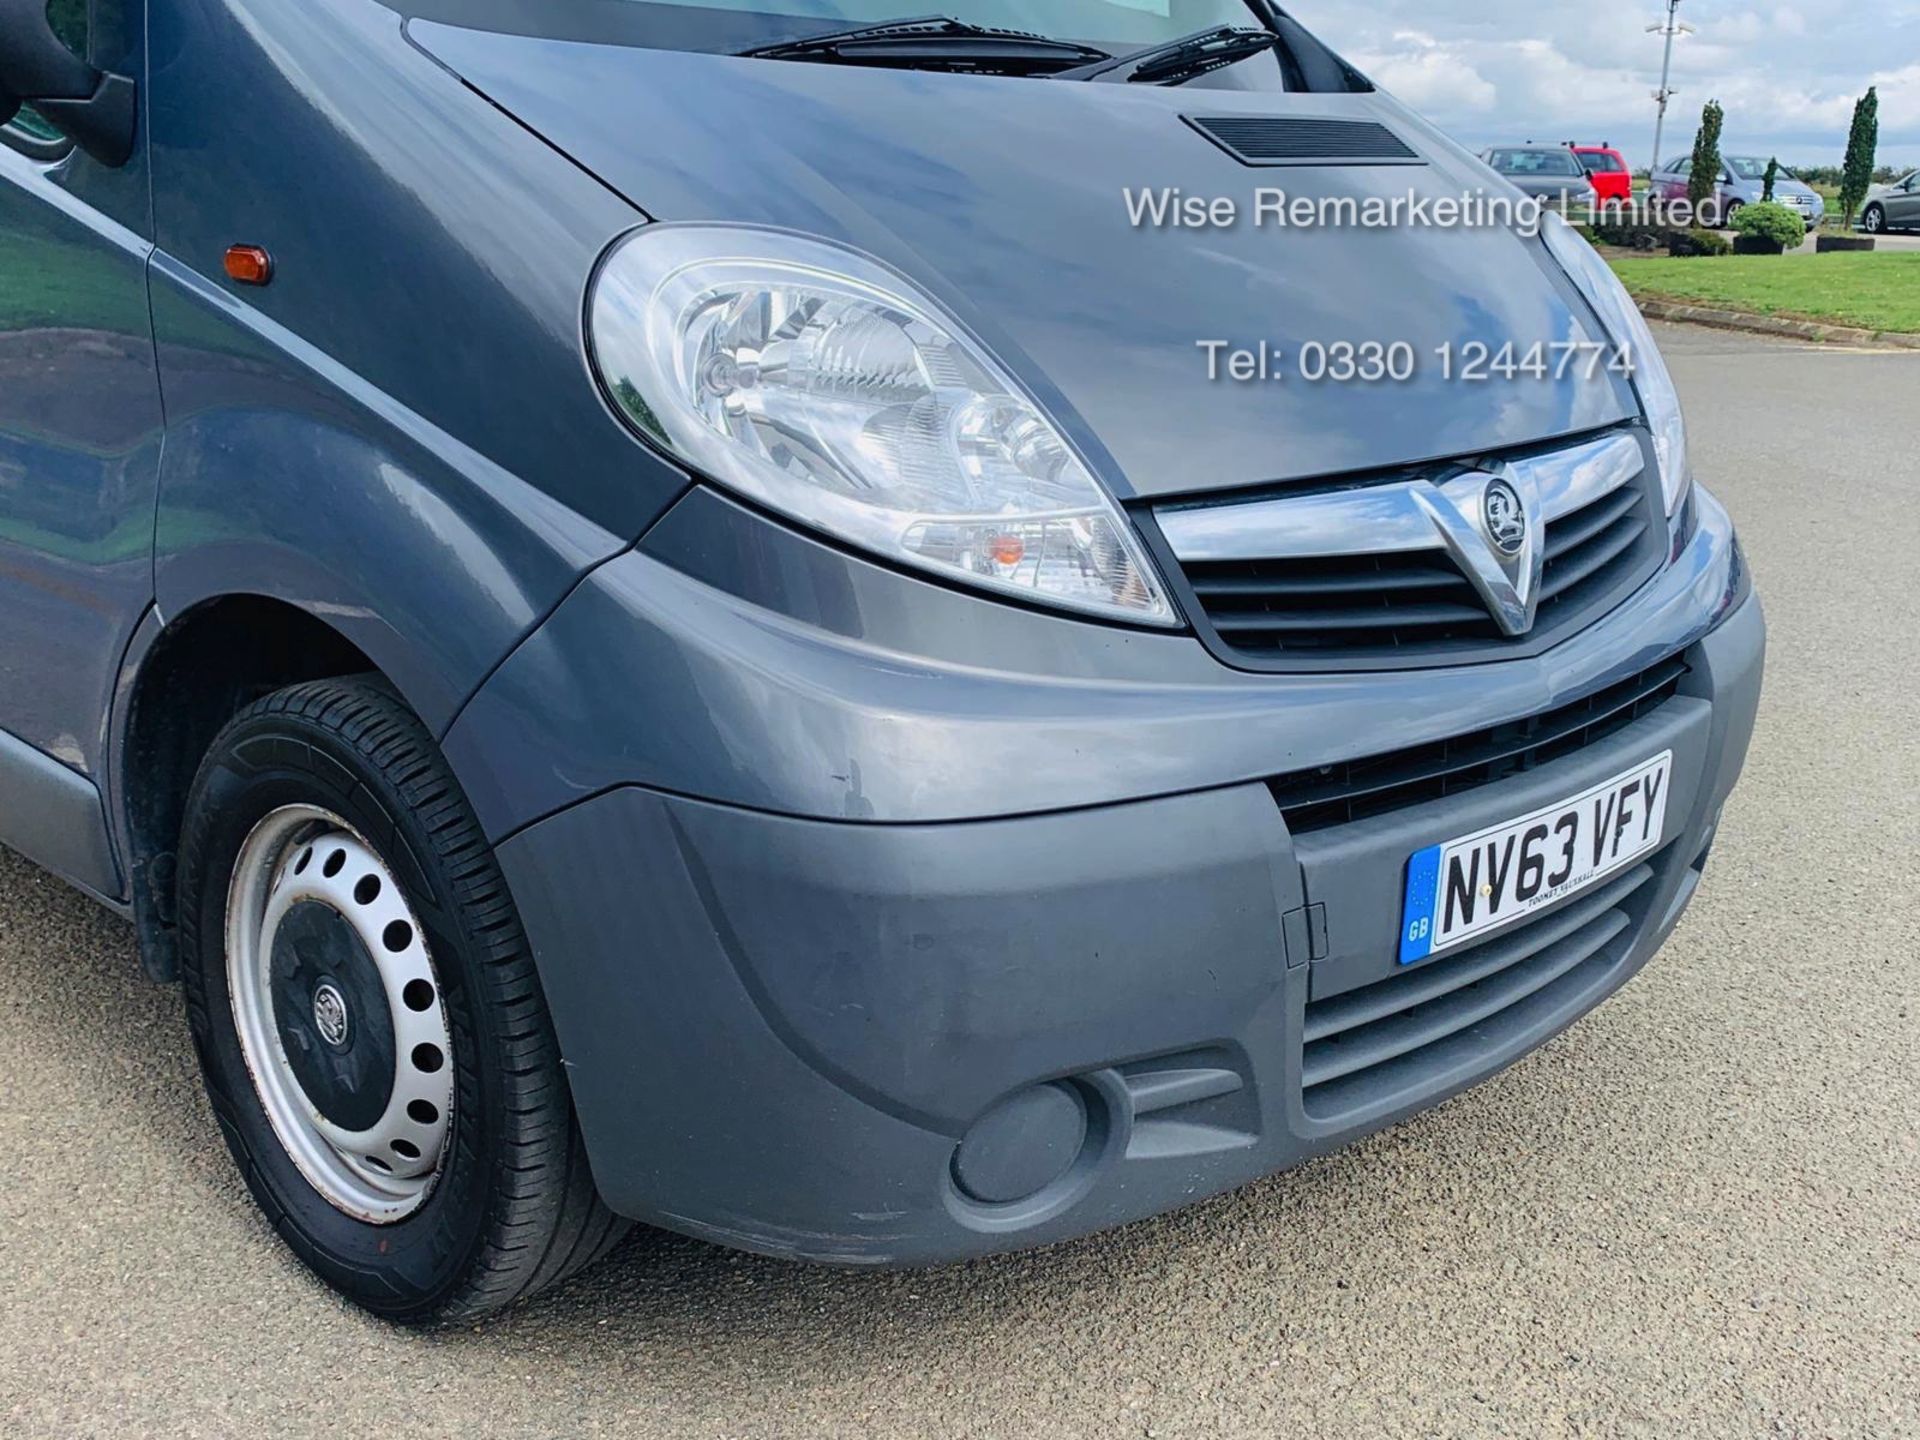 Vauxhall Vivaro 2.0 CDTI 2900 Minibus - 2014 Model - Wheel Chair Access -1 Owner From New -History - Image 4 of 21